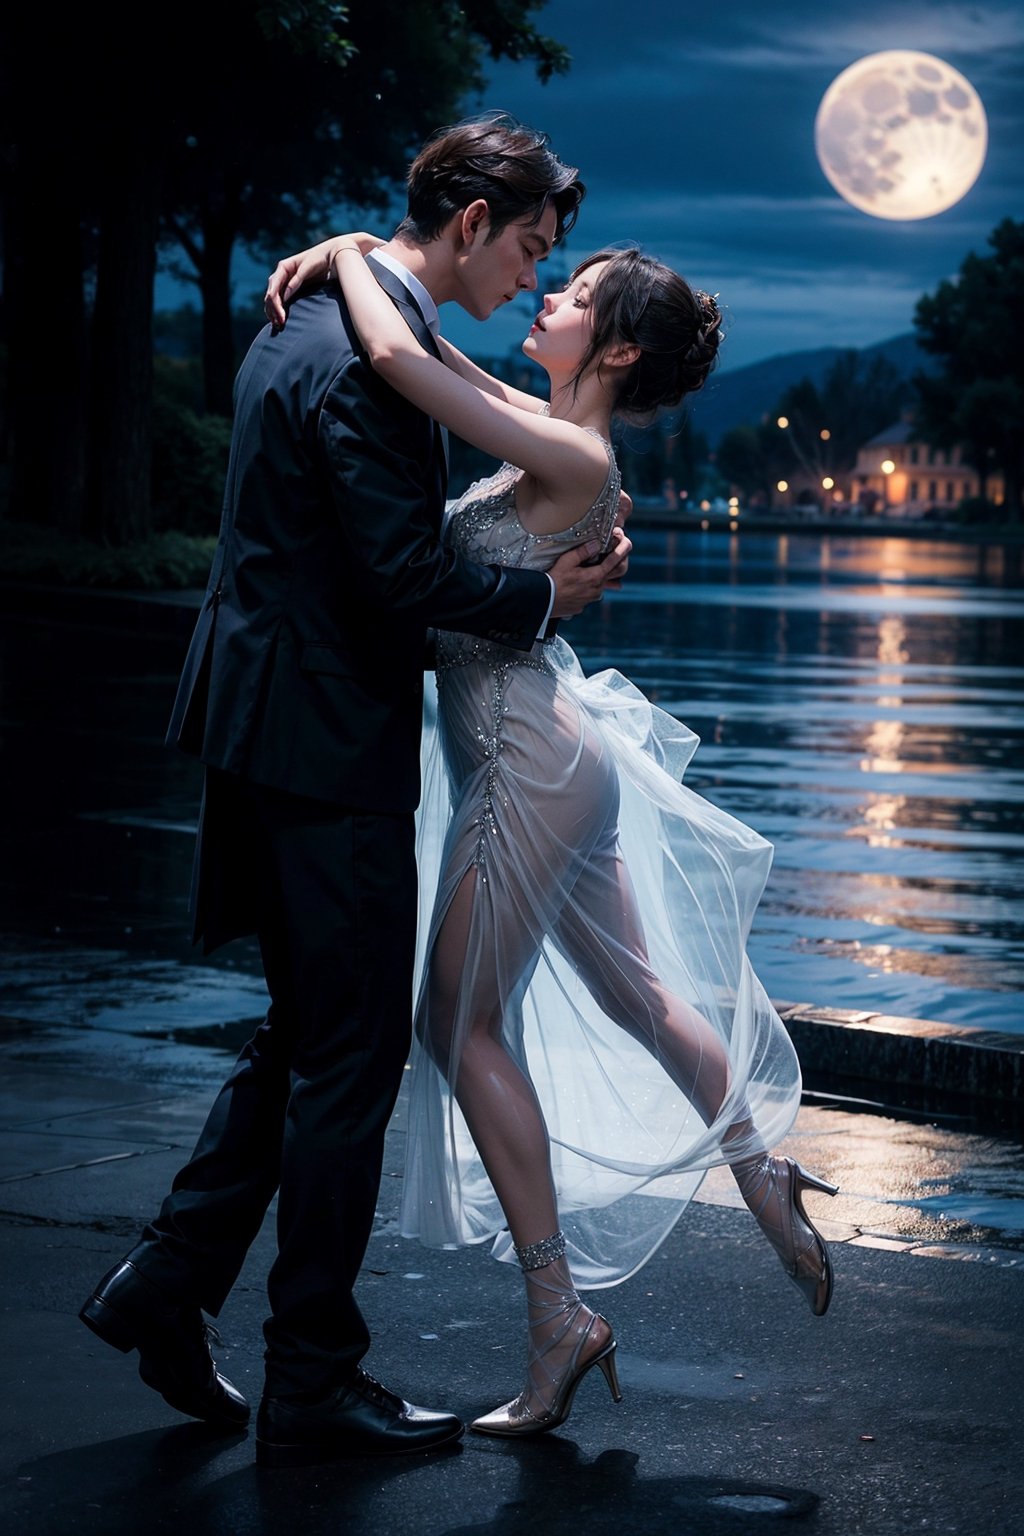 a girl in transparent dress dance tango with a man at parklake under the moon,IncrsRosalinaDef,better_hands